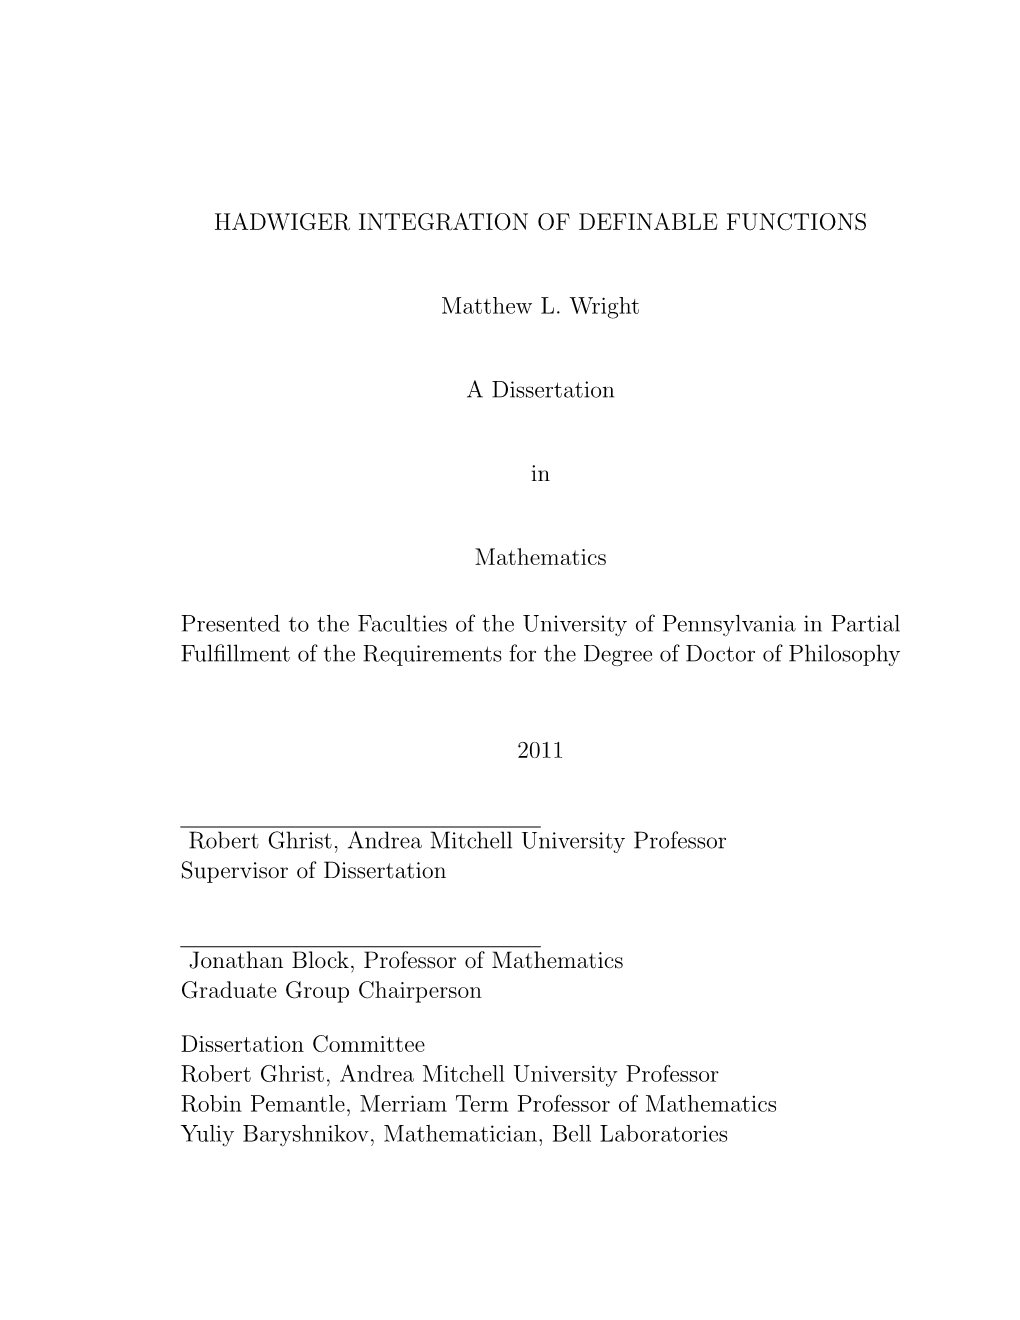 Hadwiger Integration of Definable Functionals